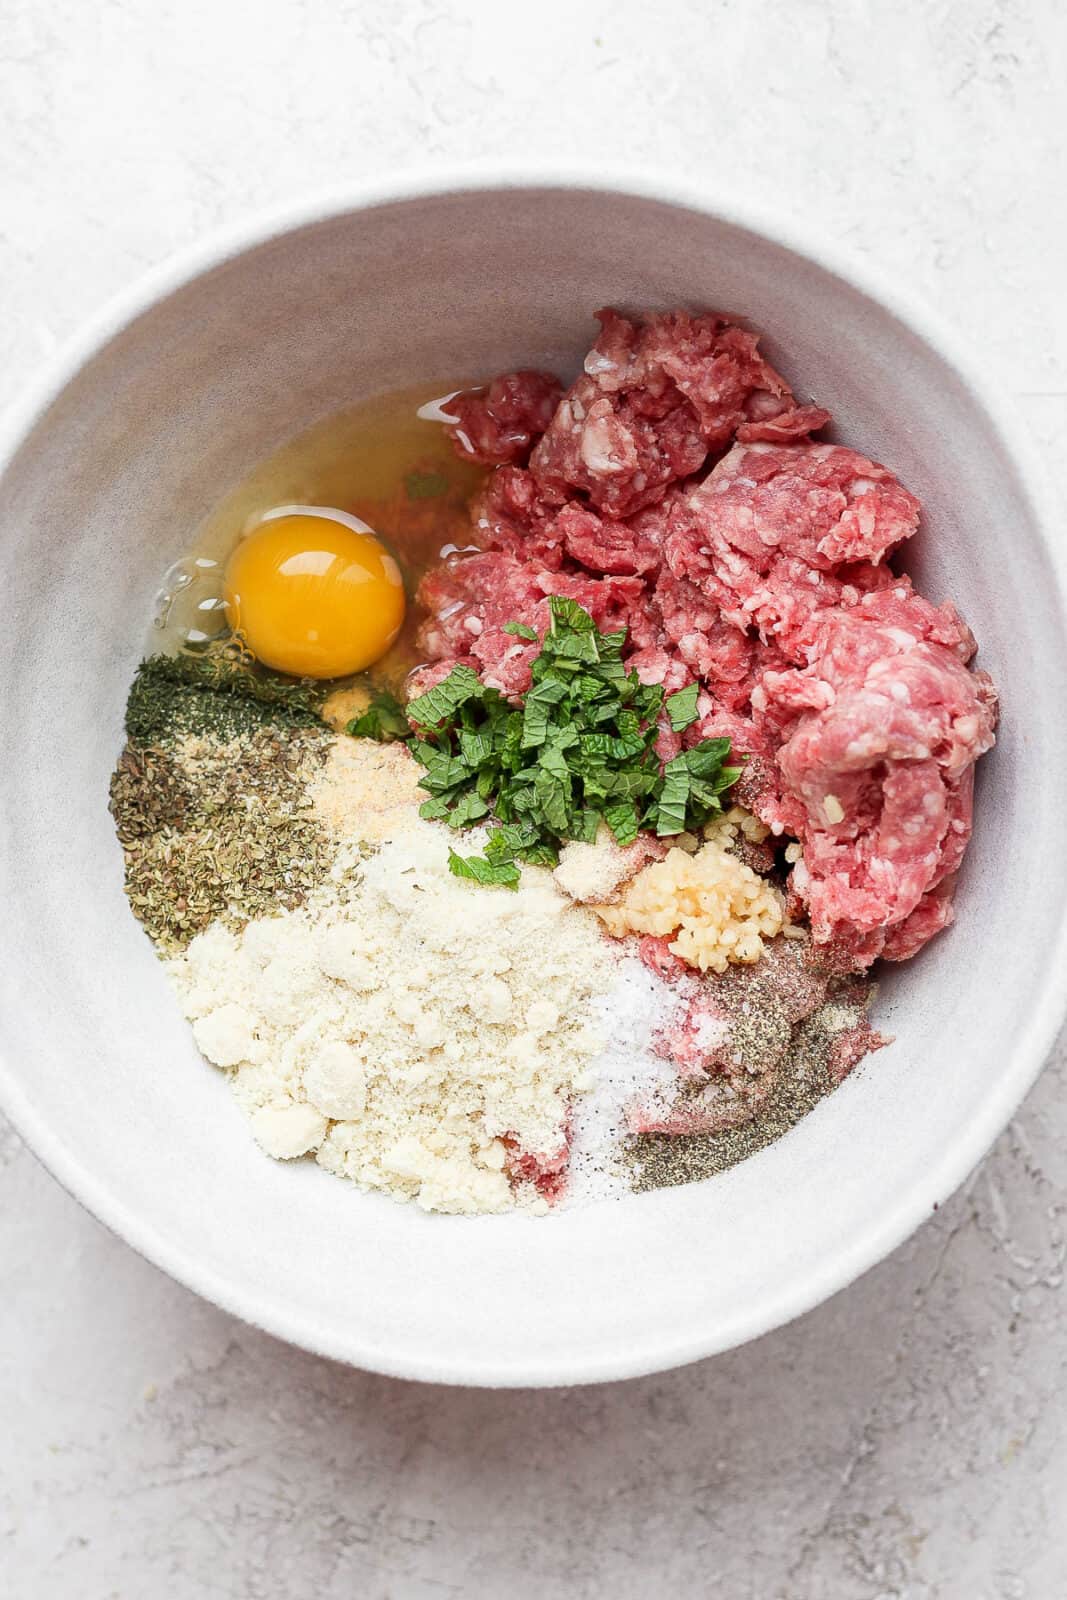 Lamb meatball ingredients in a bowl.